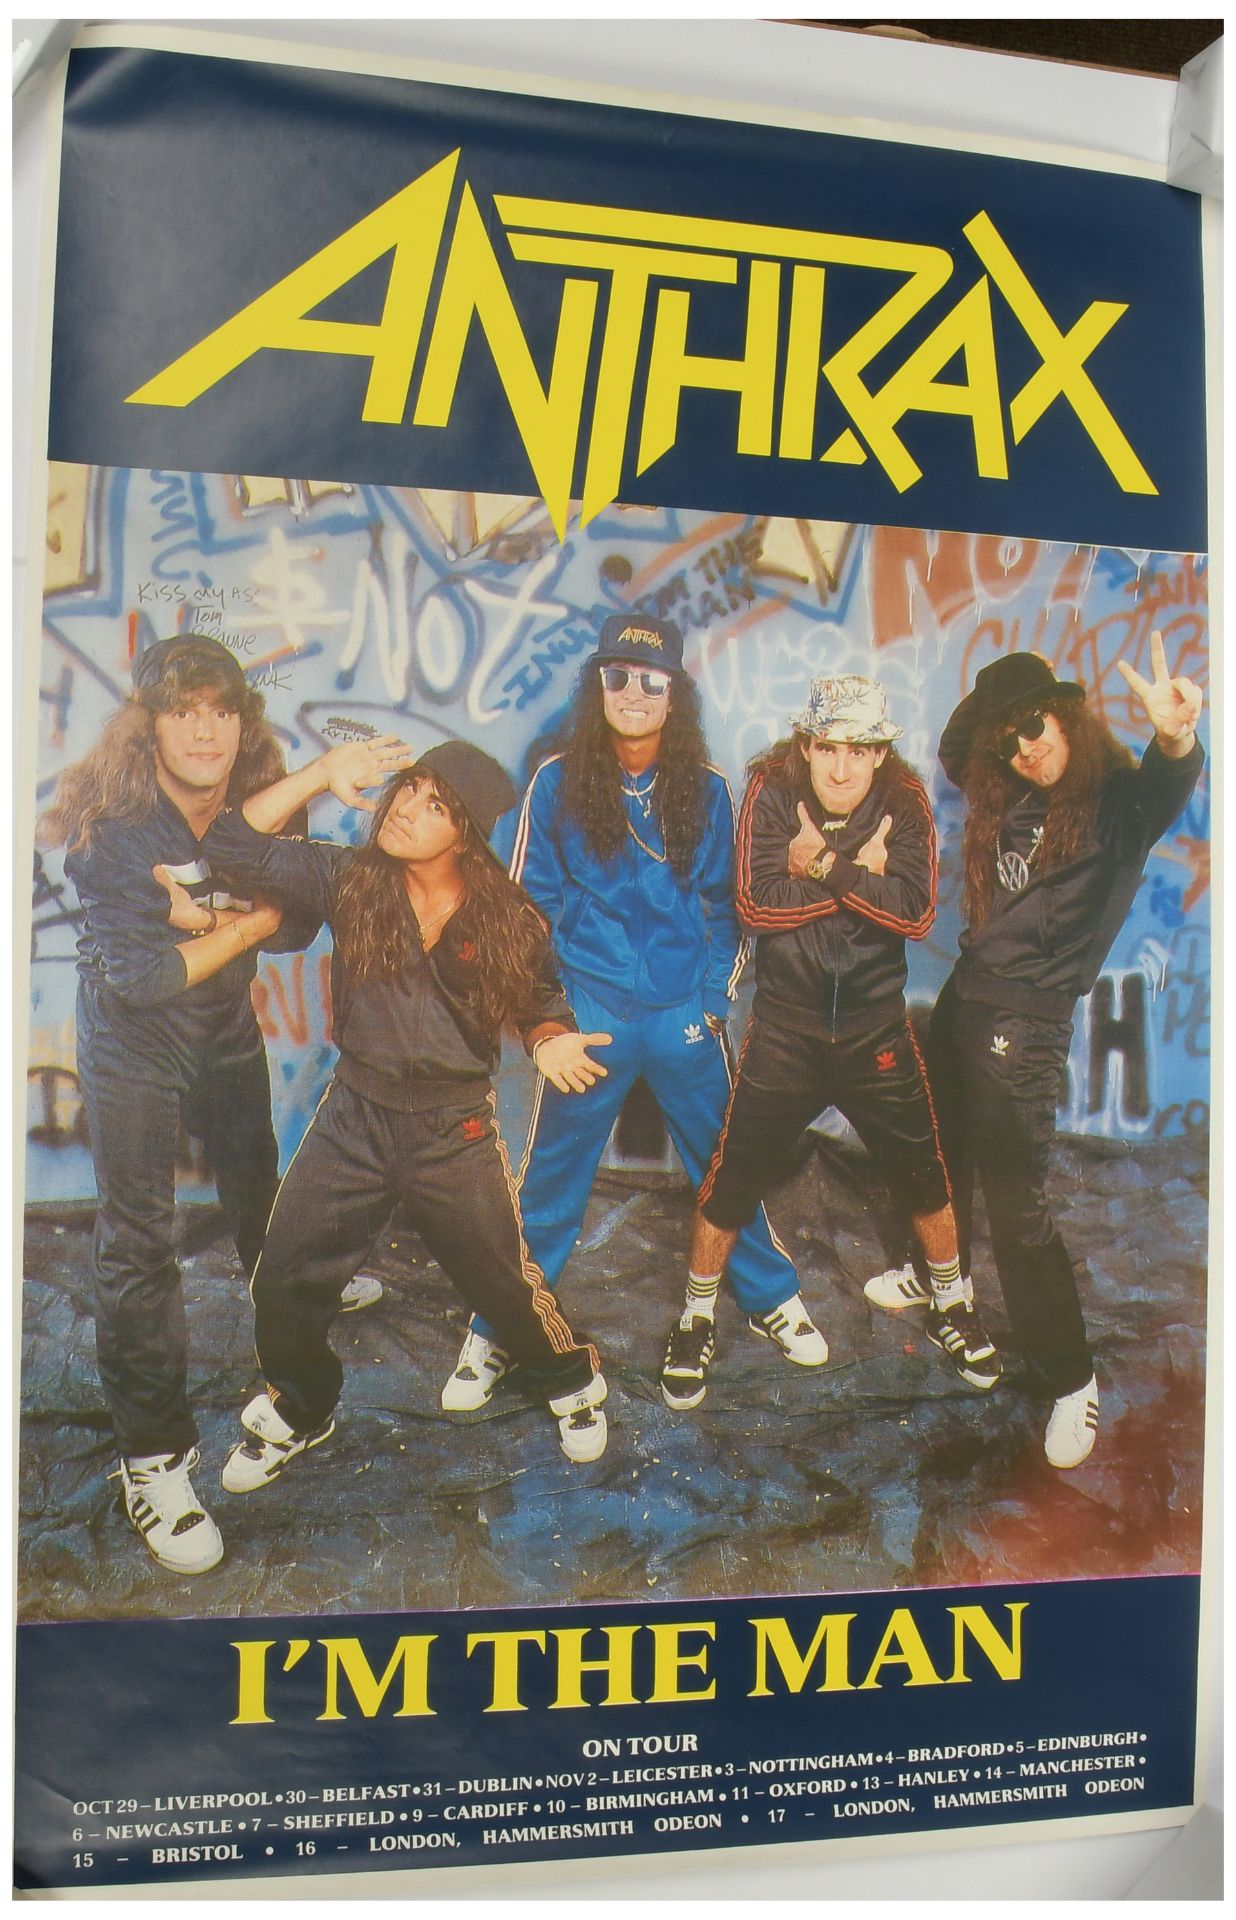 Anthrax - A Pair of Posters - Image 2 of 2